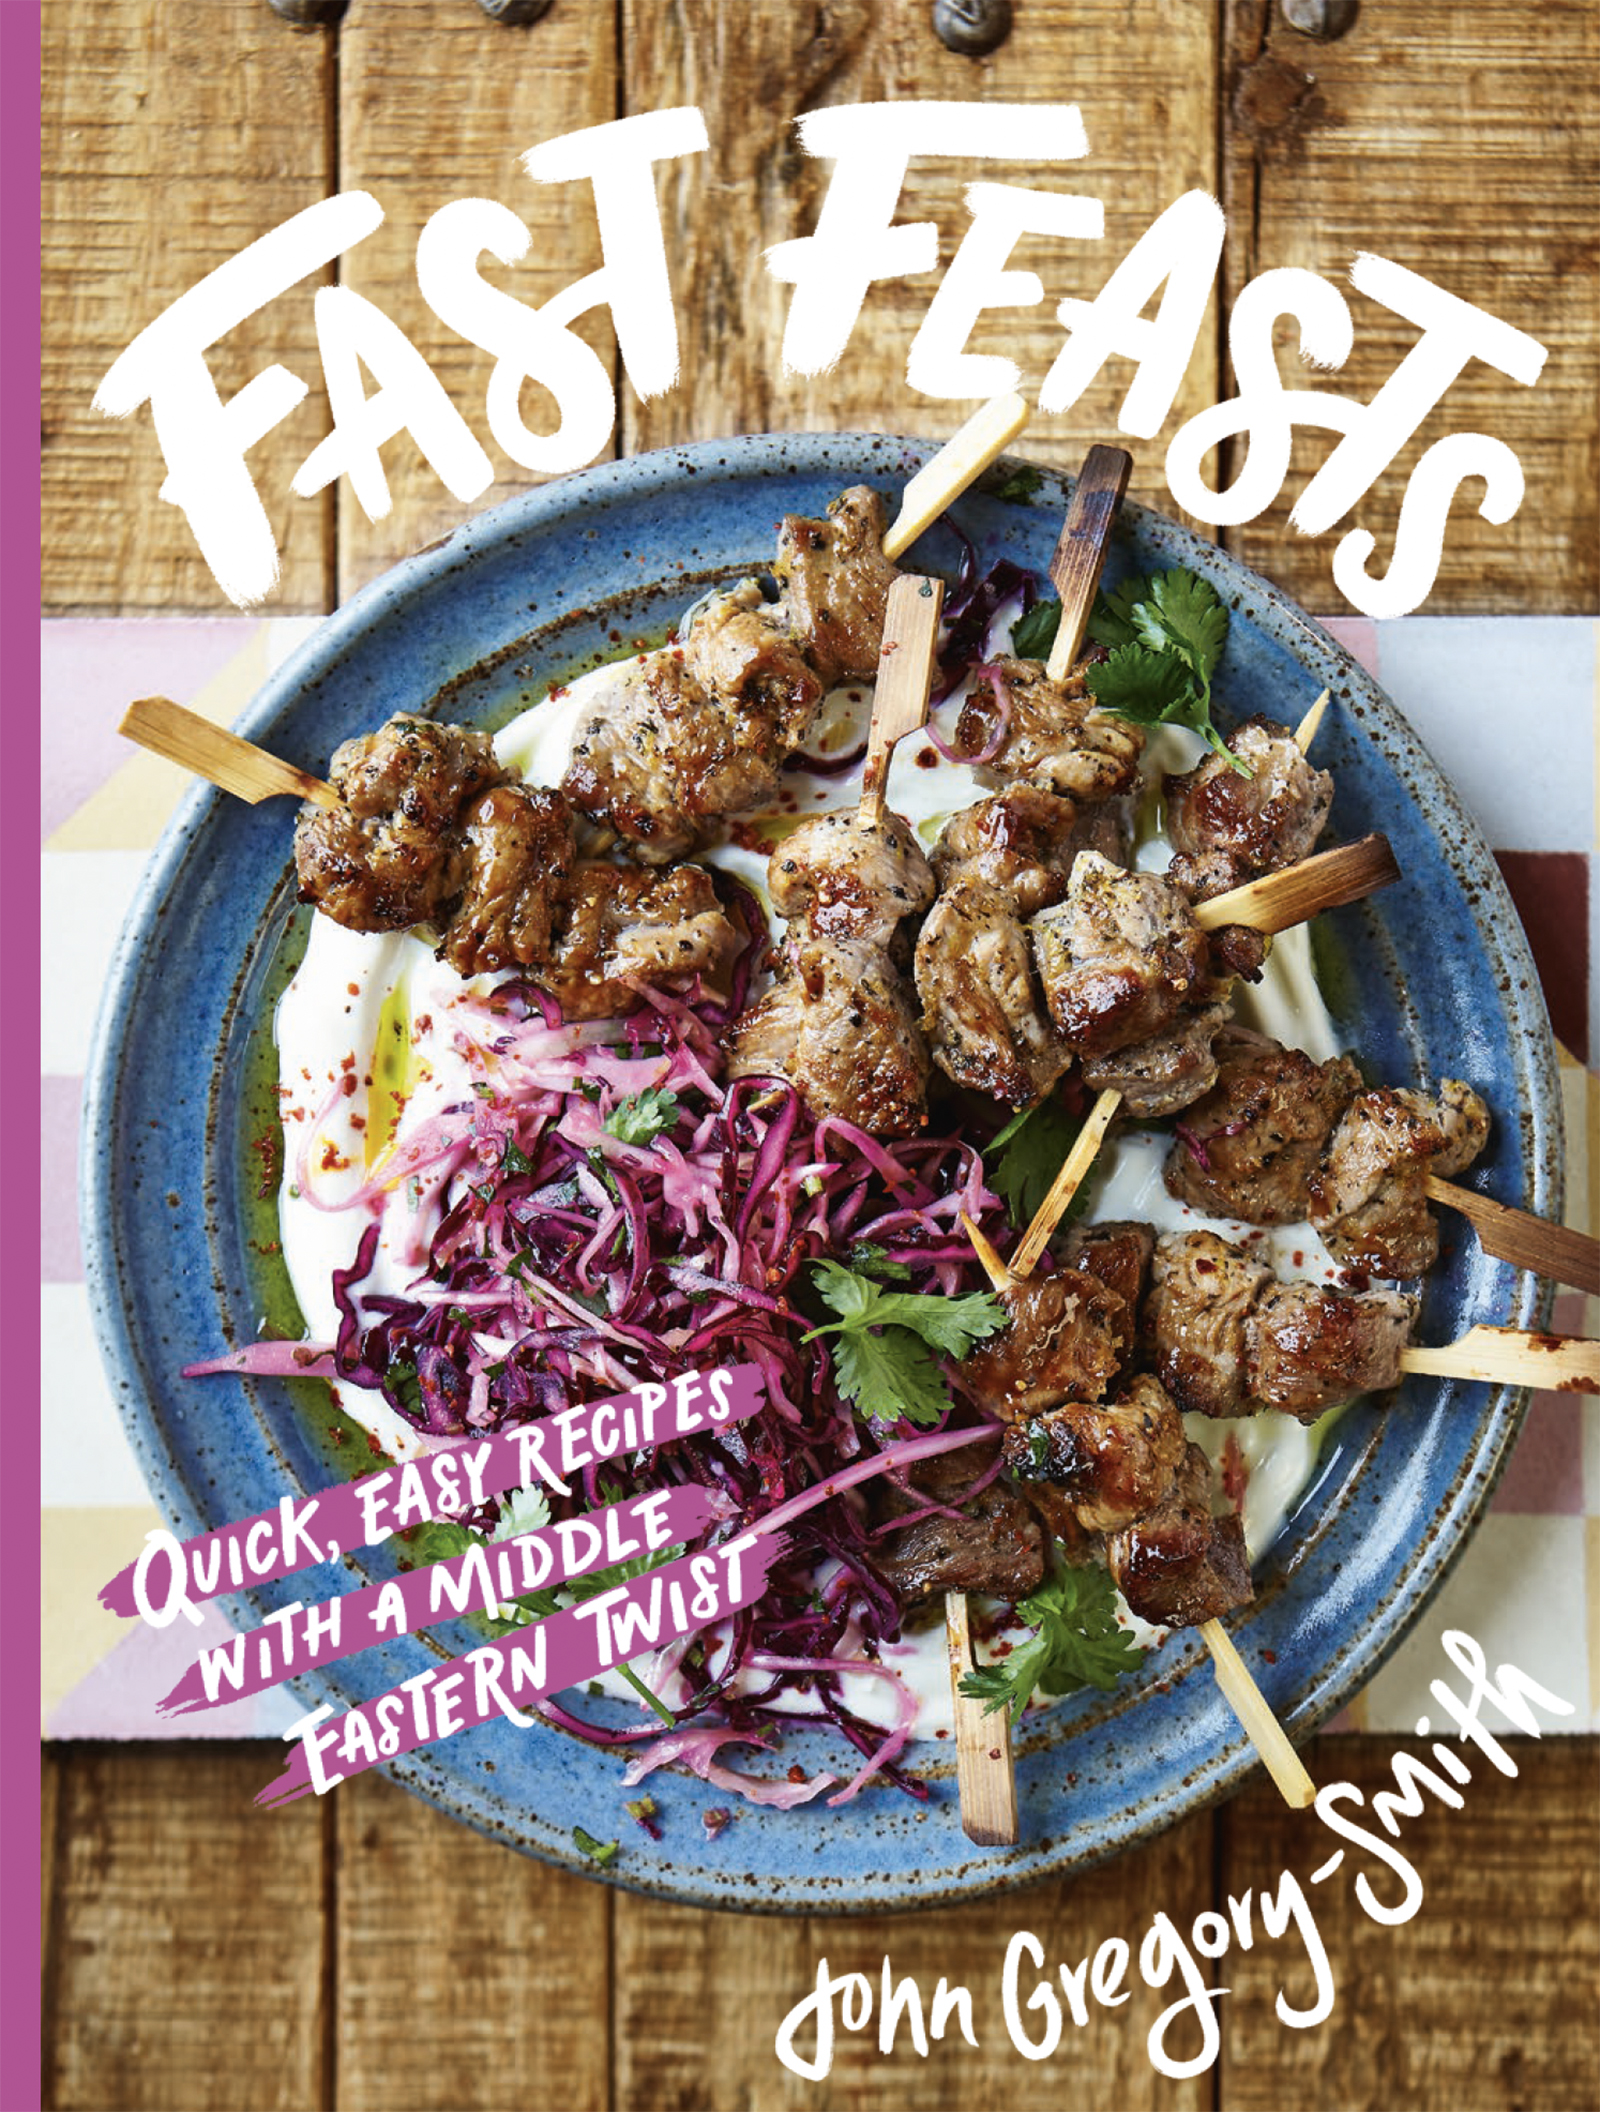 Cover of Fast Feasts cookbook by John Gregory Smith